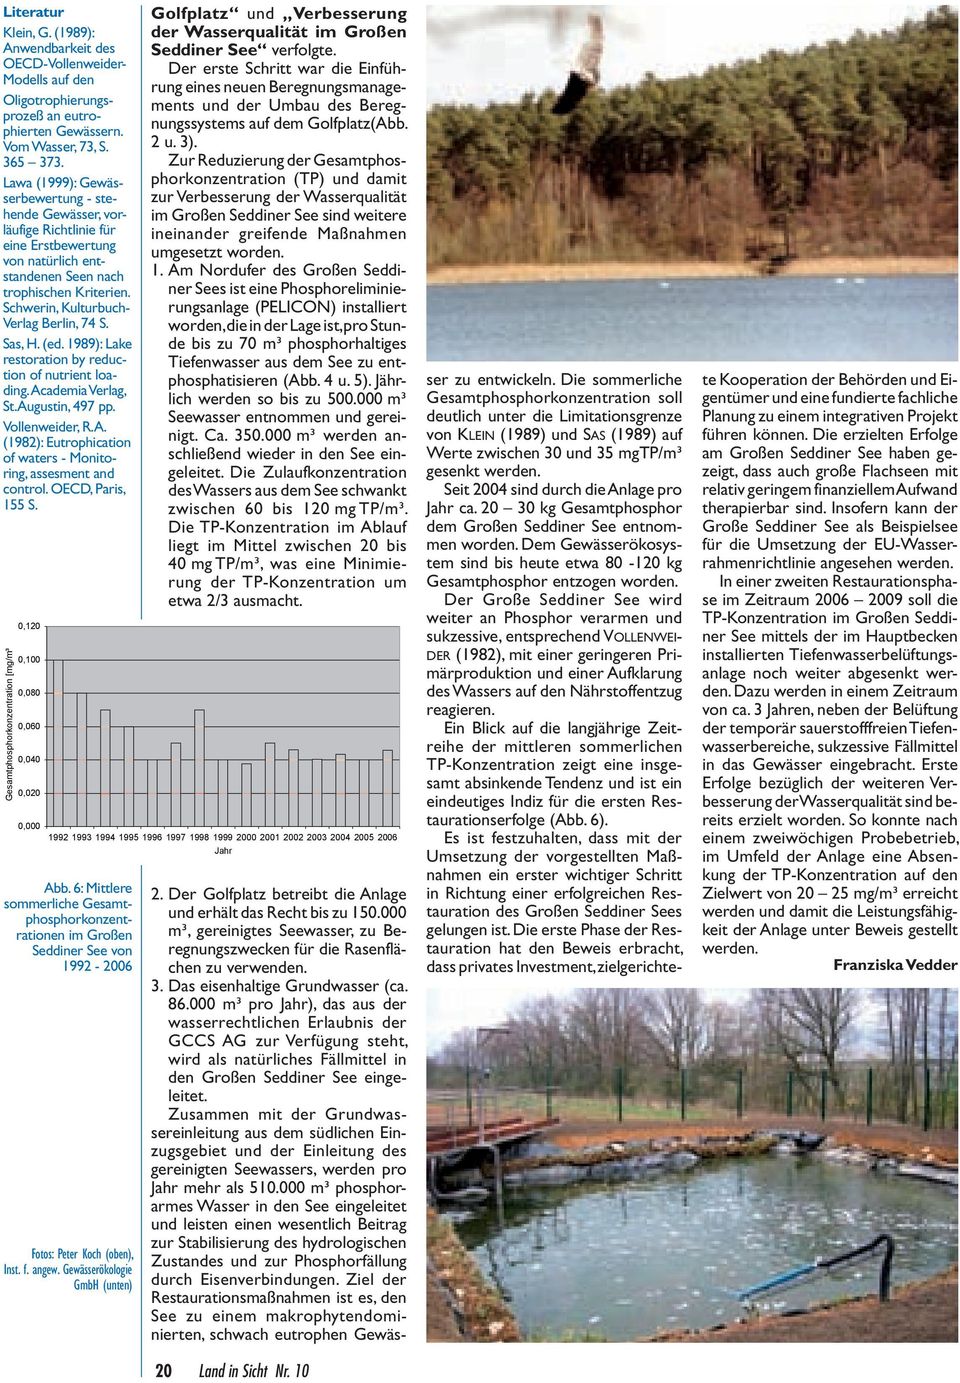 Sas, H. (ed. 1989): Lake restoration by reduction of nutrient loading. Academia Verlag, St.Augustin, 497 pp. Vollenweider, R.A. (1982): Eutrophication of waters - Monitoring, assesment and control.